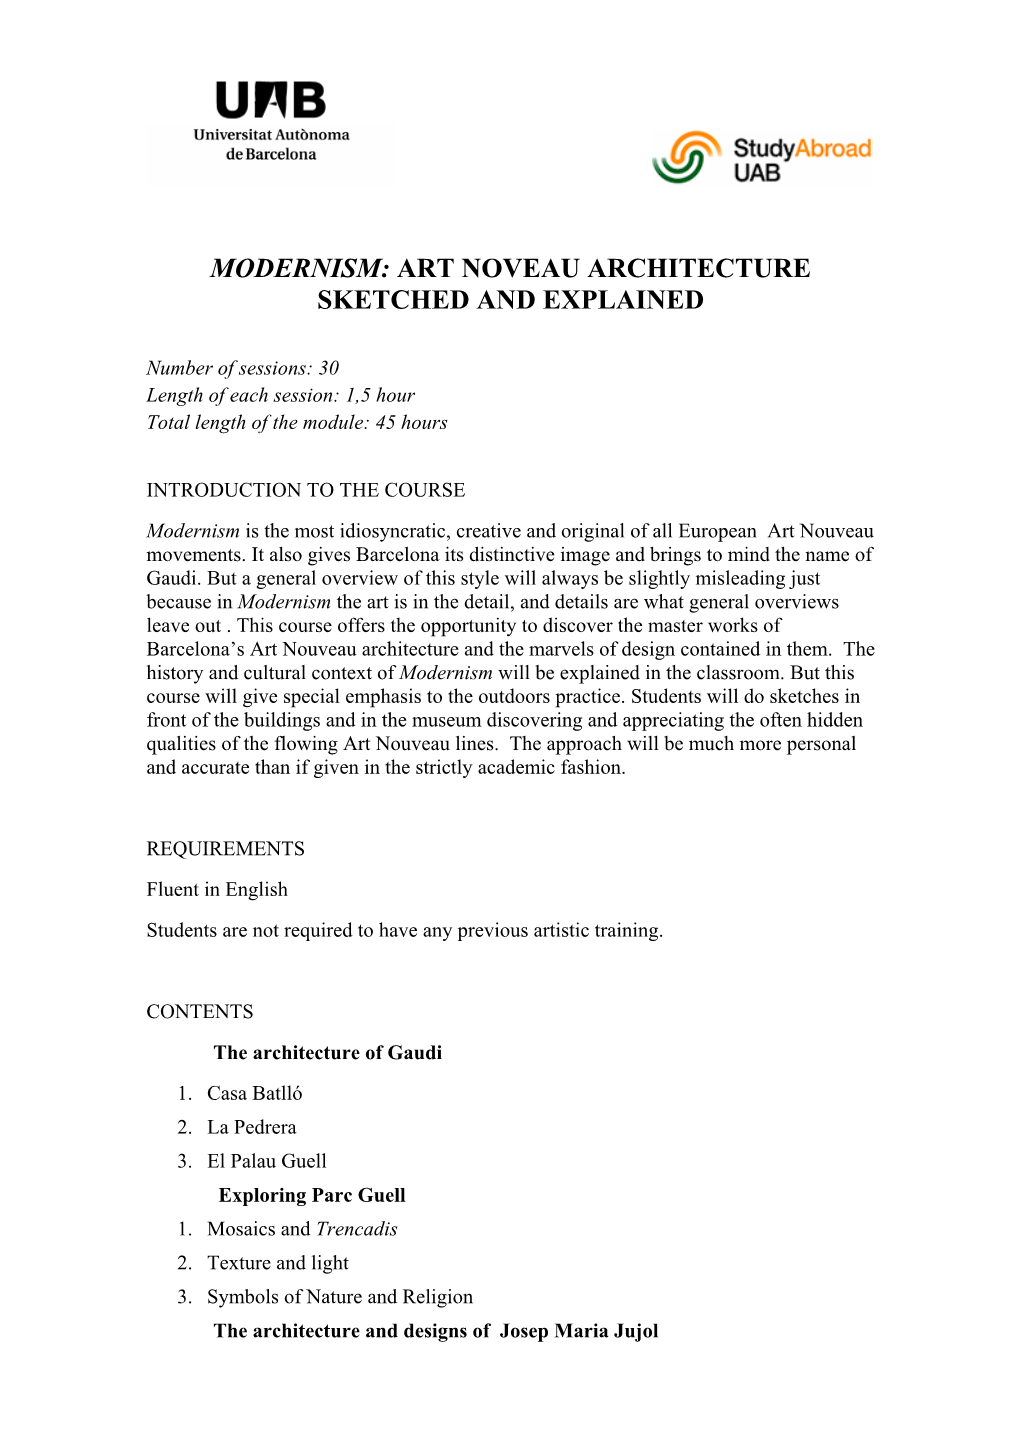 Modernism: Art Noveau Architecture Sketched and Explained